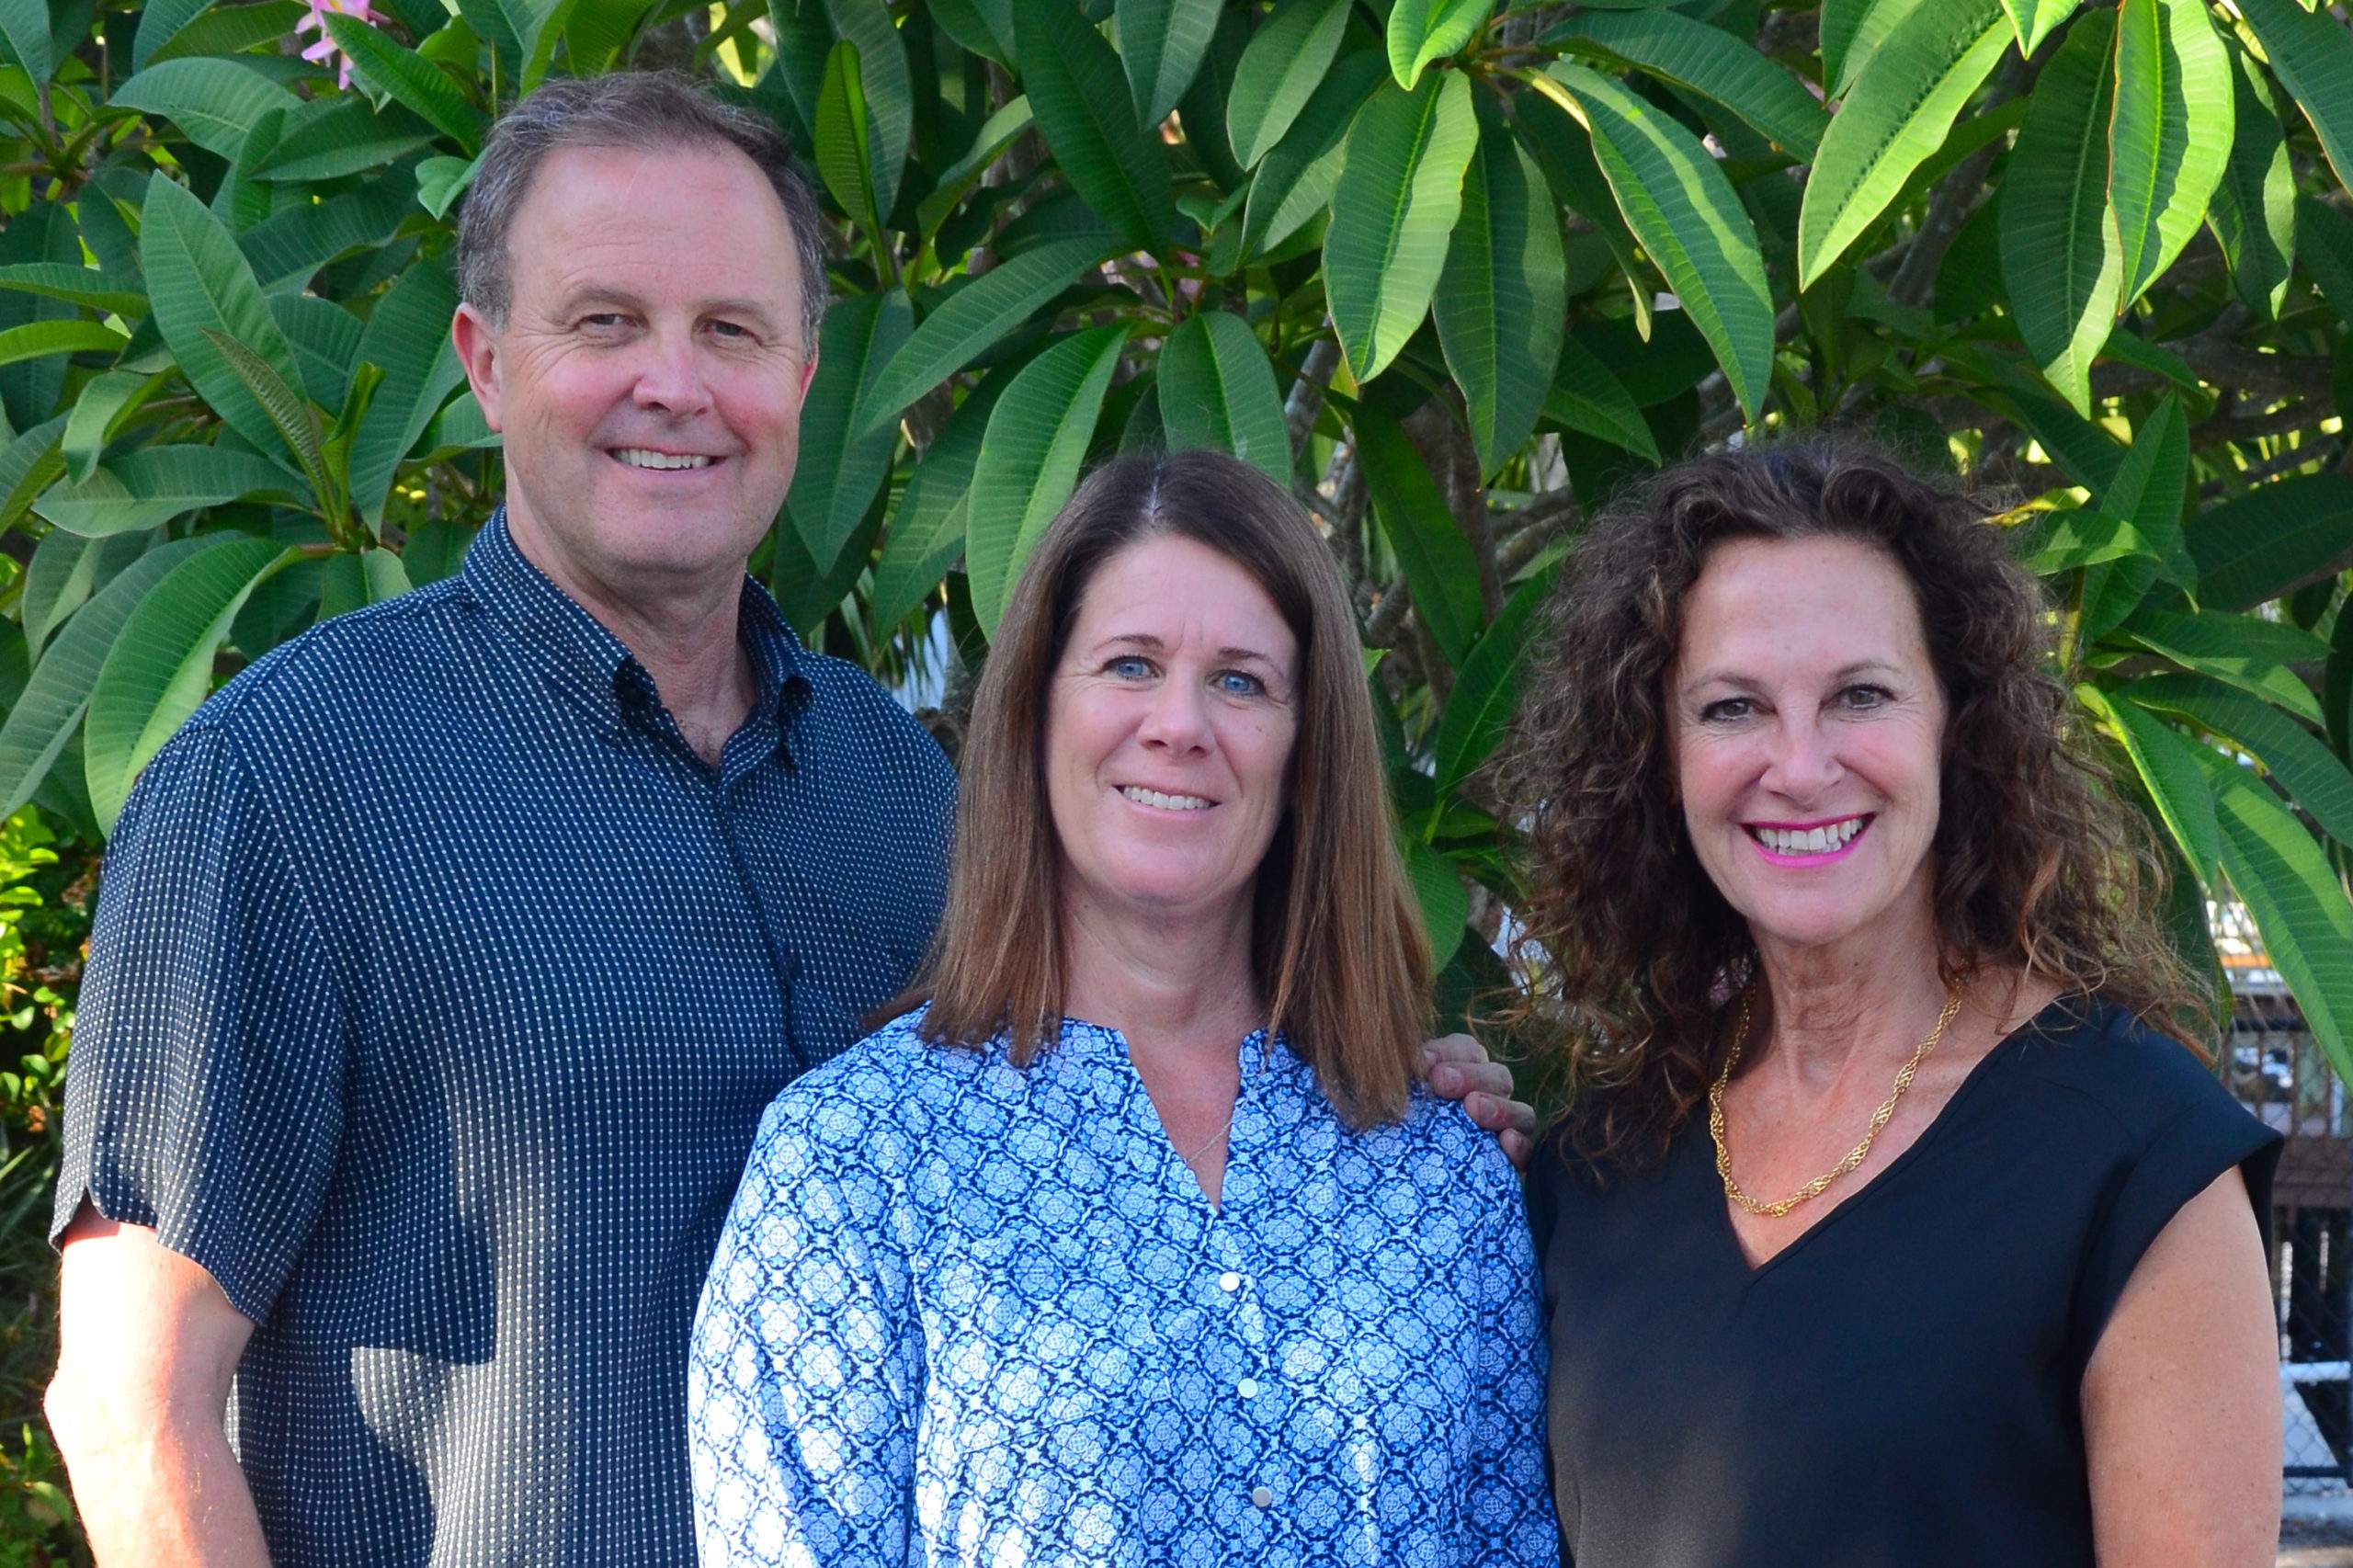 Rich Kase, Michelle Kase, and Janice Bayruns, Owners of FirstLight Home Care of Westshore and Carrollwood